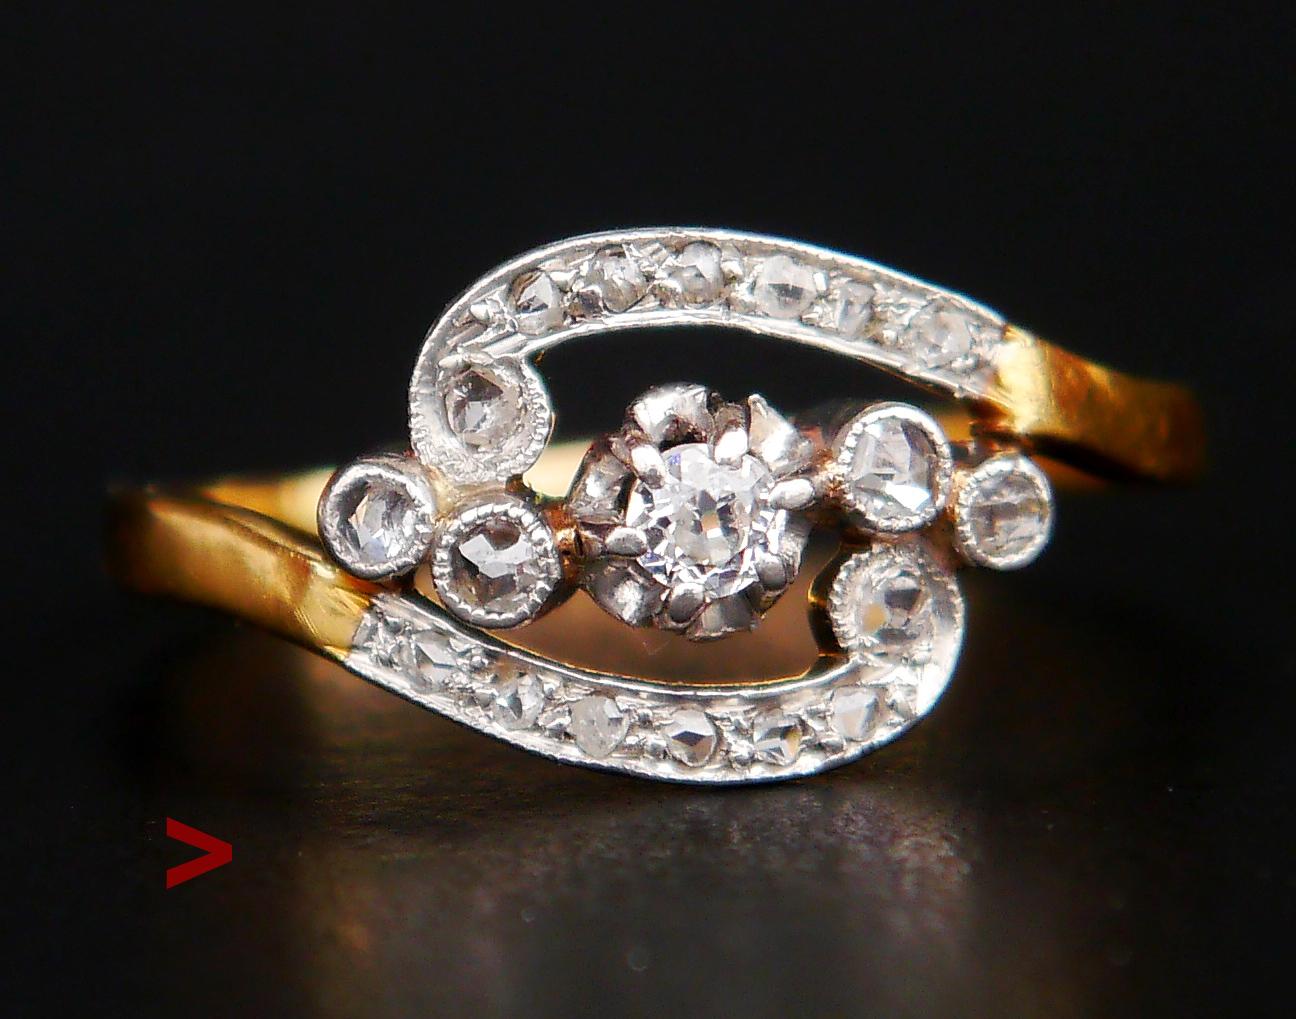 Beautiful Antique Ring featuring intricate design in solid Yellow and Platinum with one old European cut and 18 rose cut Diamonds.

The Crown has inter-twisting bands with a top in Platinum adorned with pave set diamonds . All stones have their open